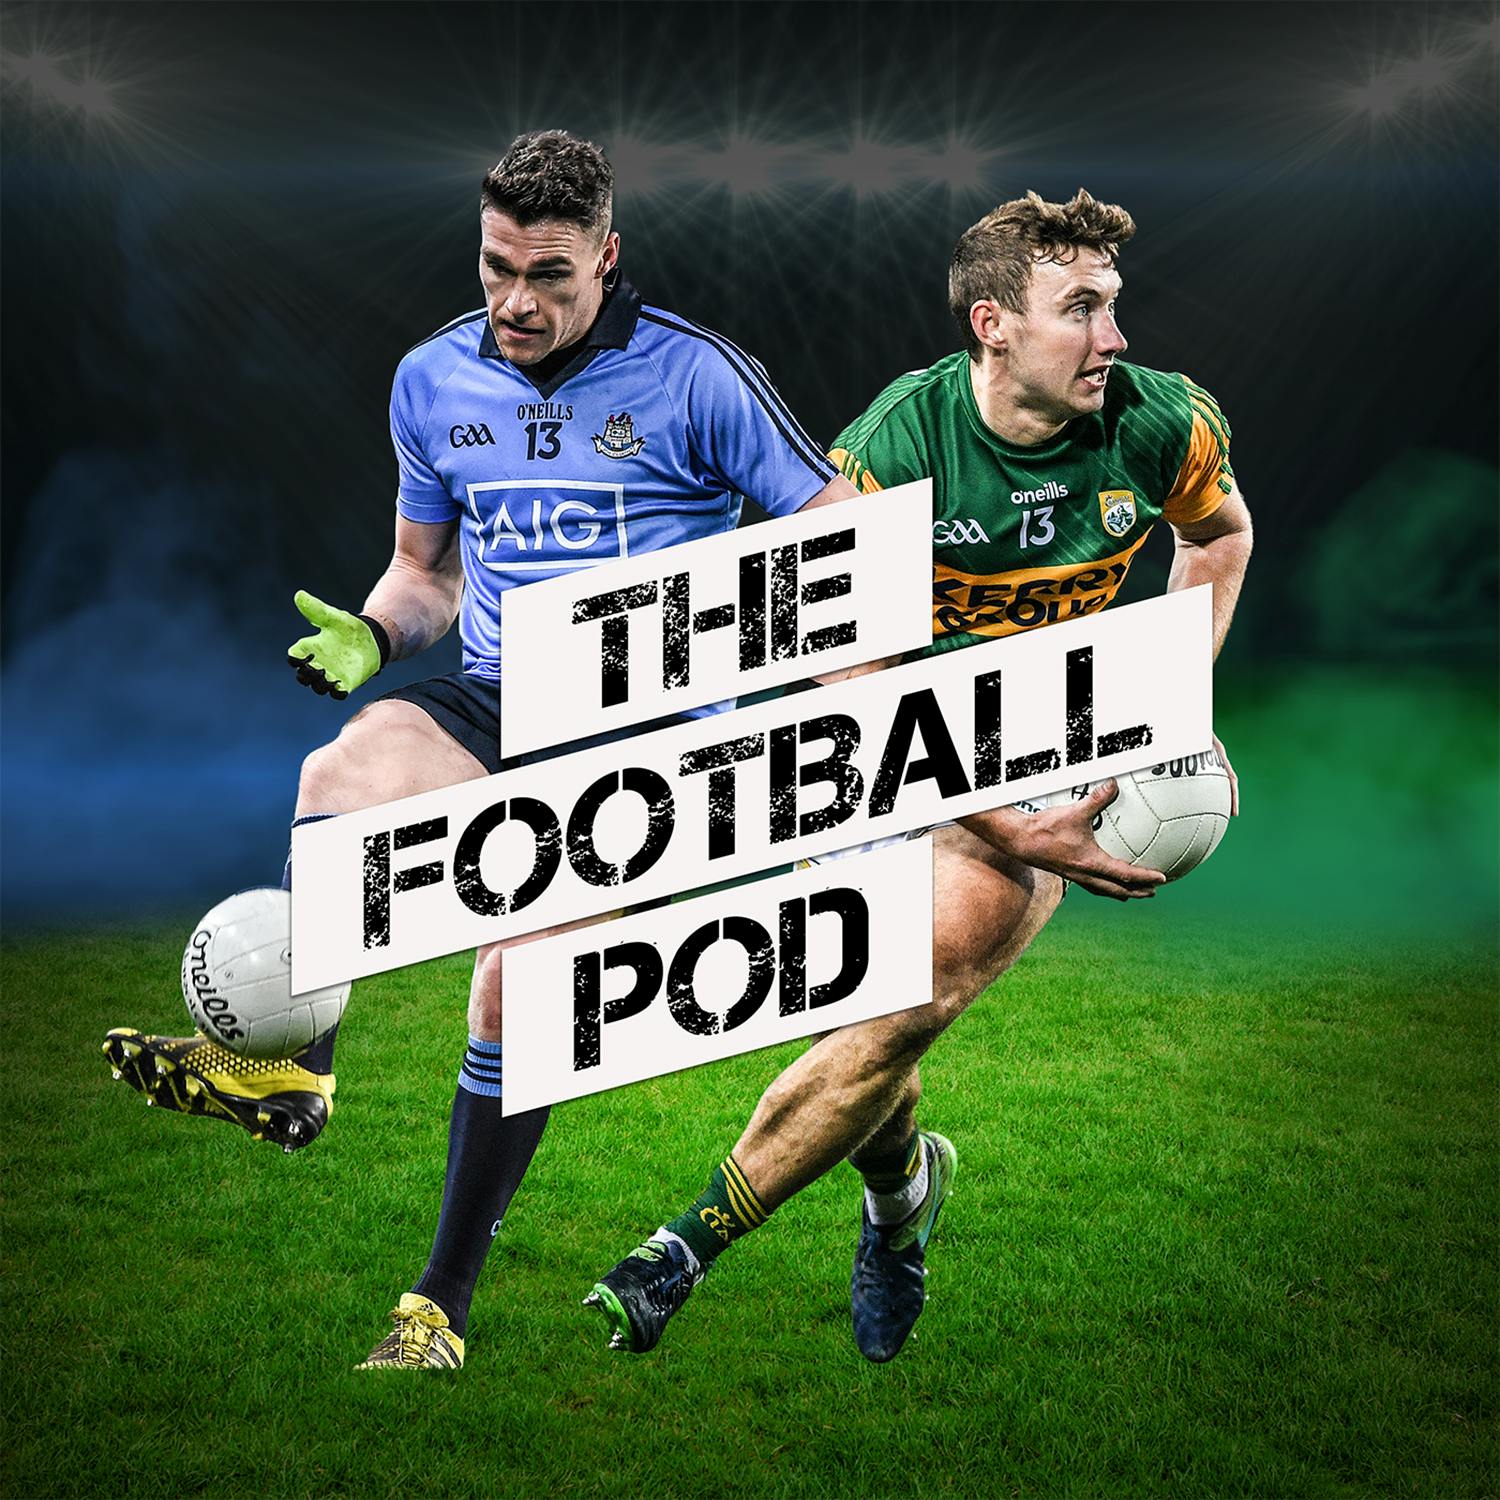 TFP members show: James and Paddy fix Gaelic Football - here’s what your missing!